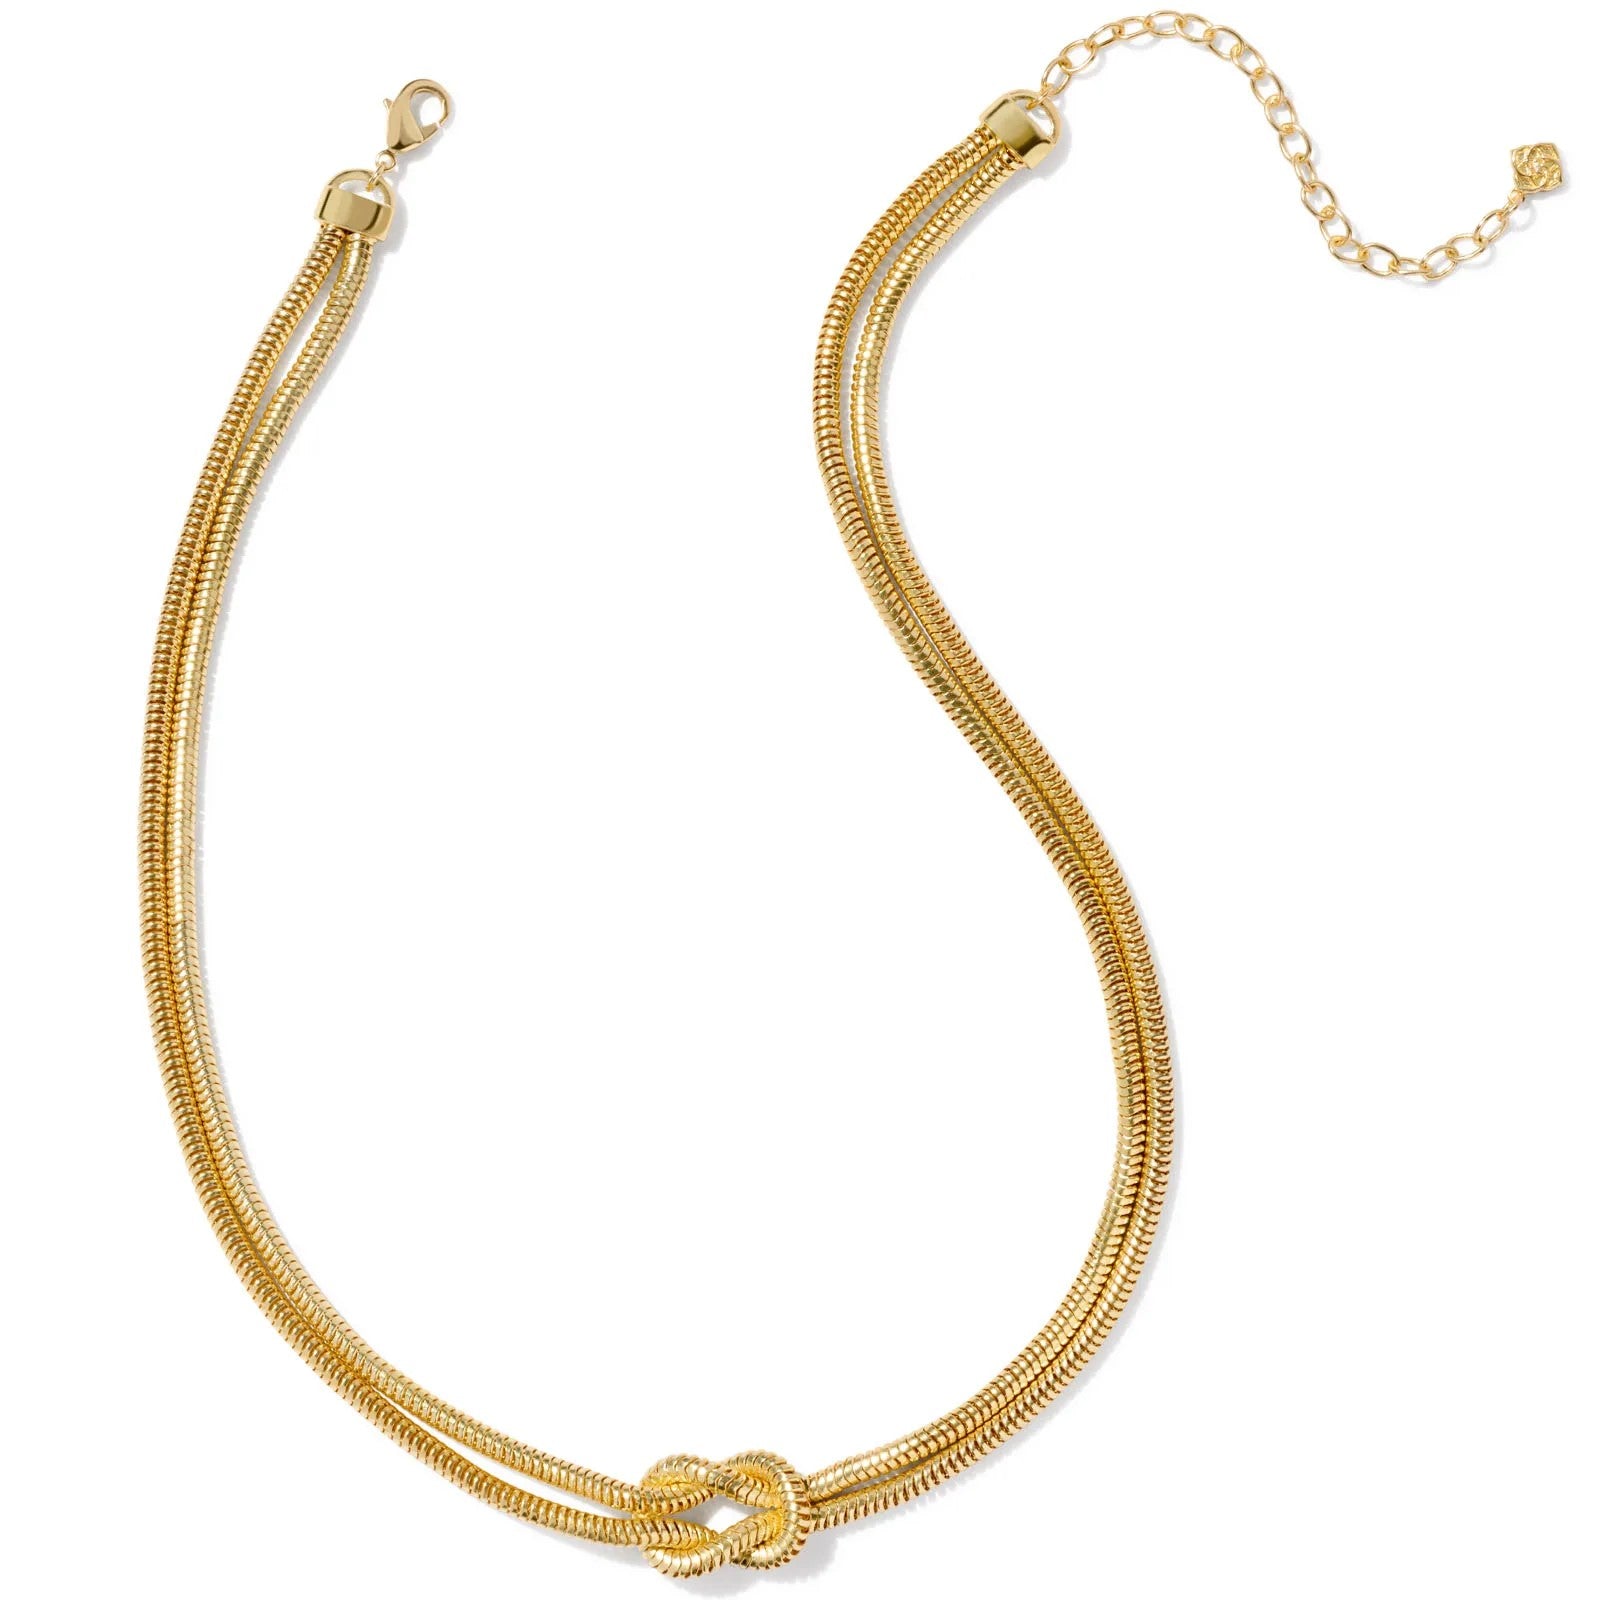 Kendra Scott | Annie Chain Necklace in Gold - Giddy Up Glamour Boutique